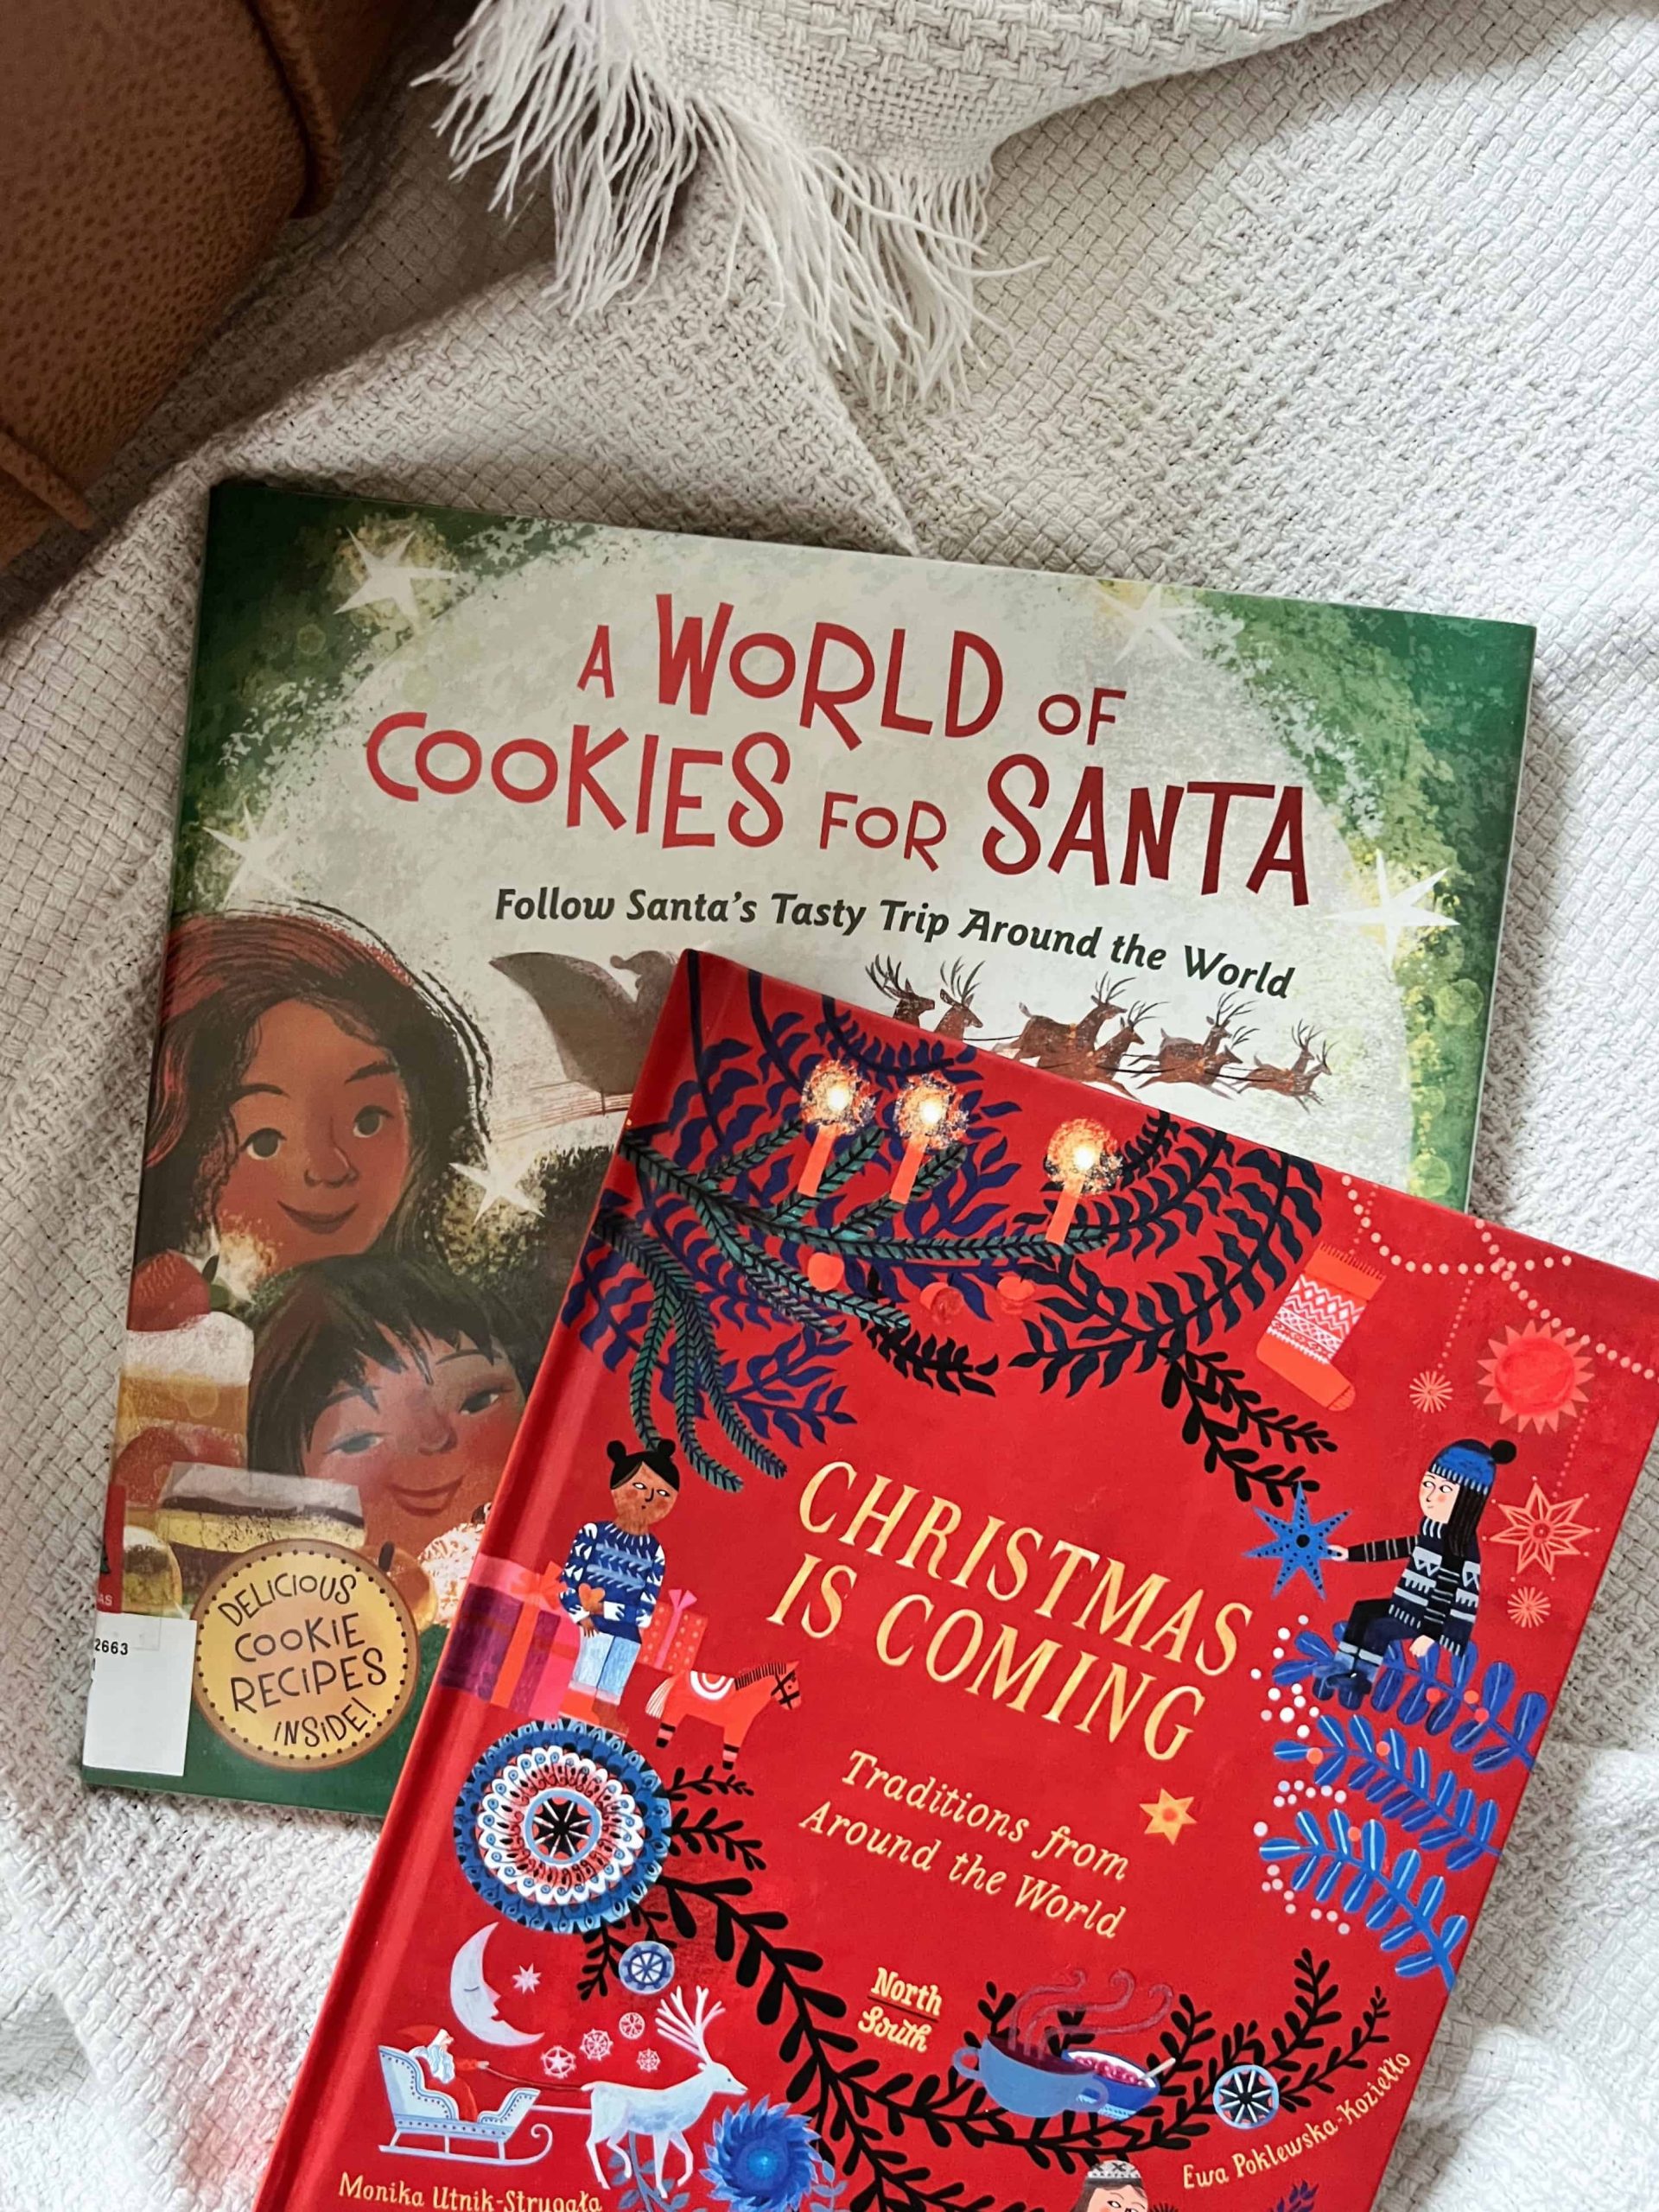 Explore Christmas traditions from around the world with the Global Explorers Club's Christmas Around the World Book List this holiday season. Books pictured in this image include Christmas is Coming: Traditions from Around the World by Monica Utnik and A World of Cookies for Santa: Follow Santa's Tasty Trip Around the World by M.E. Furman.